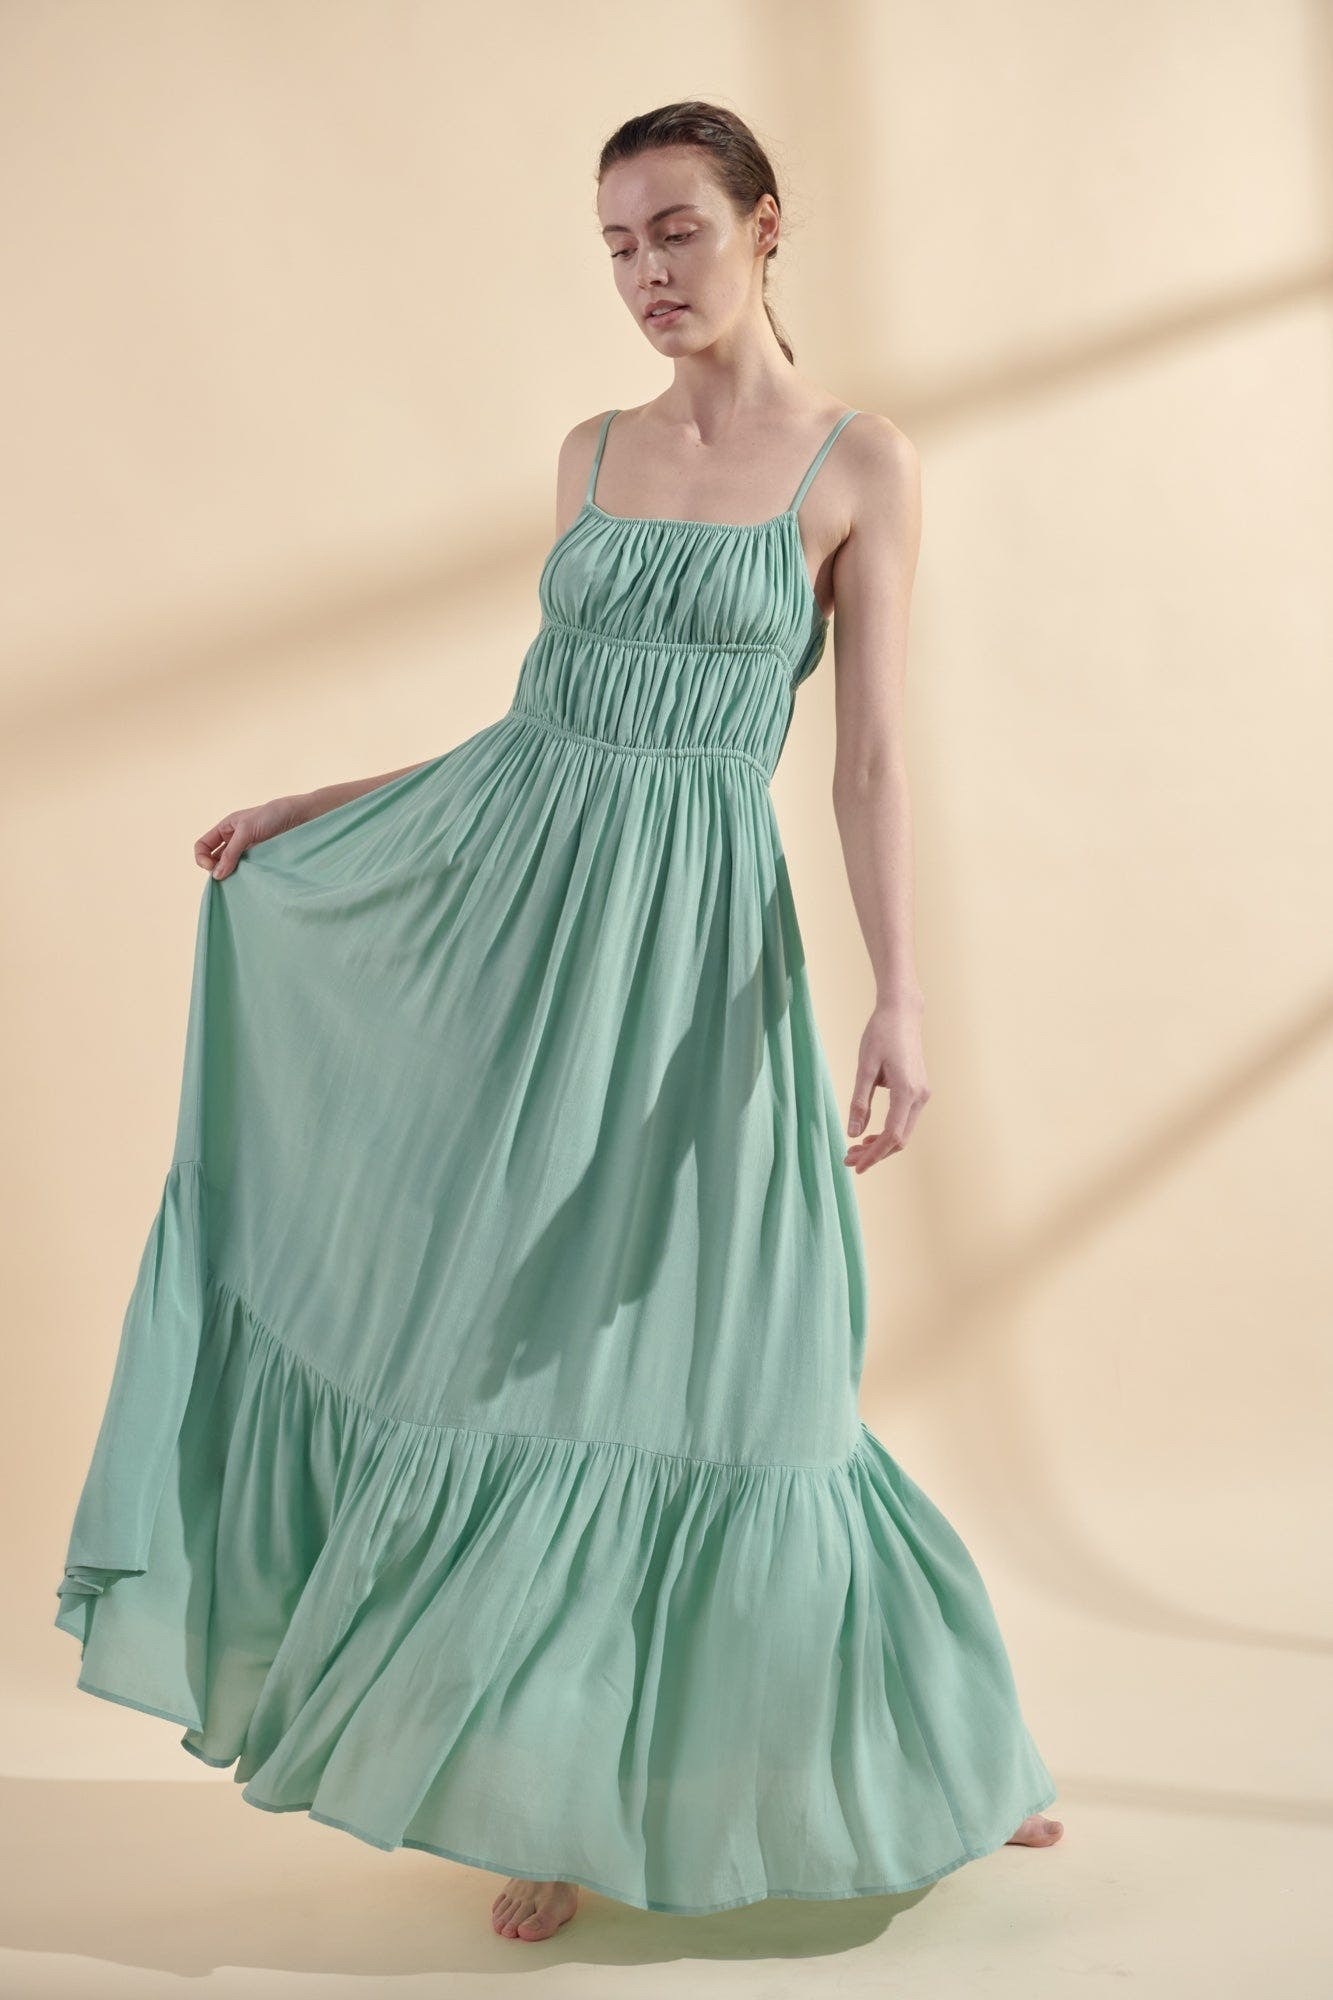 Image of model wearing the green dress